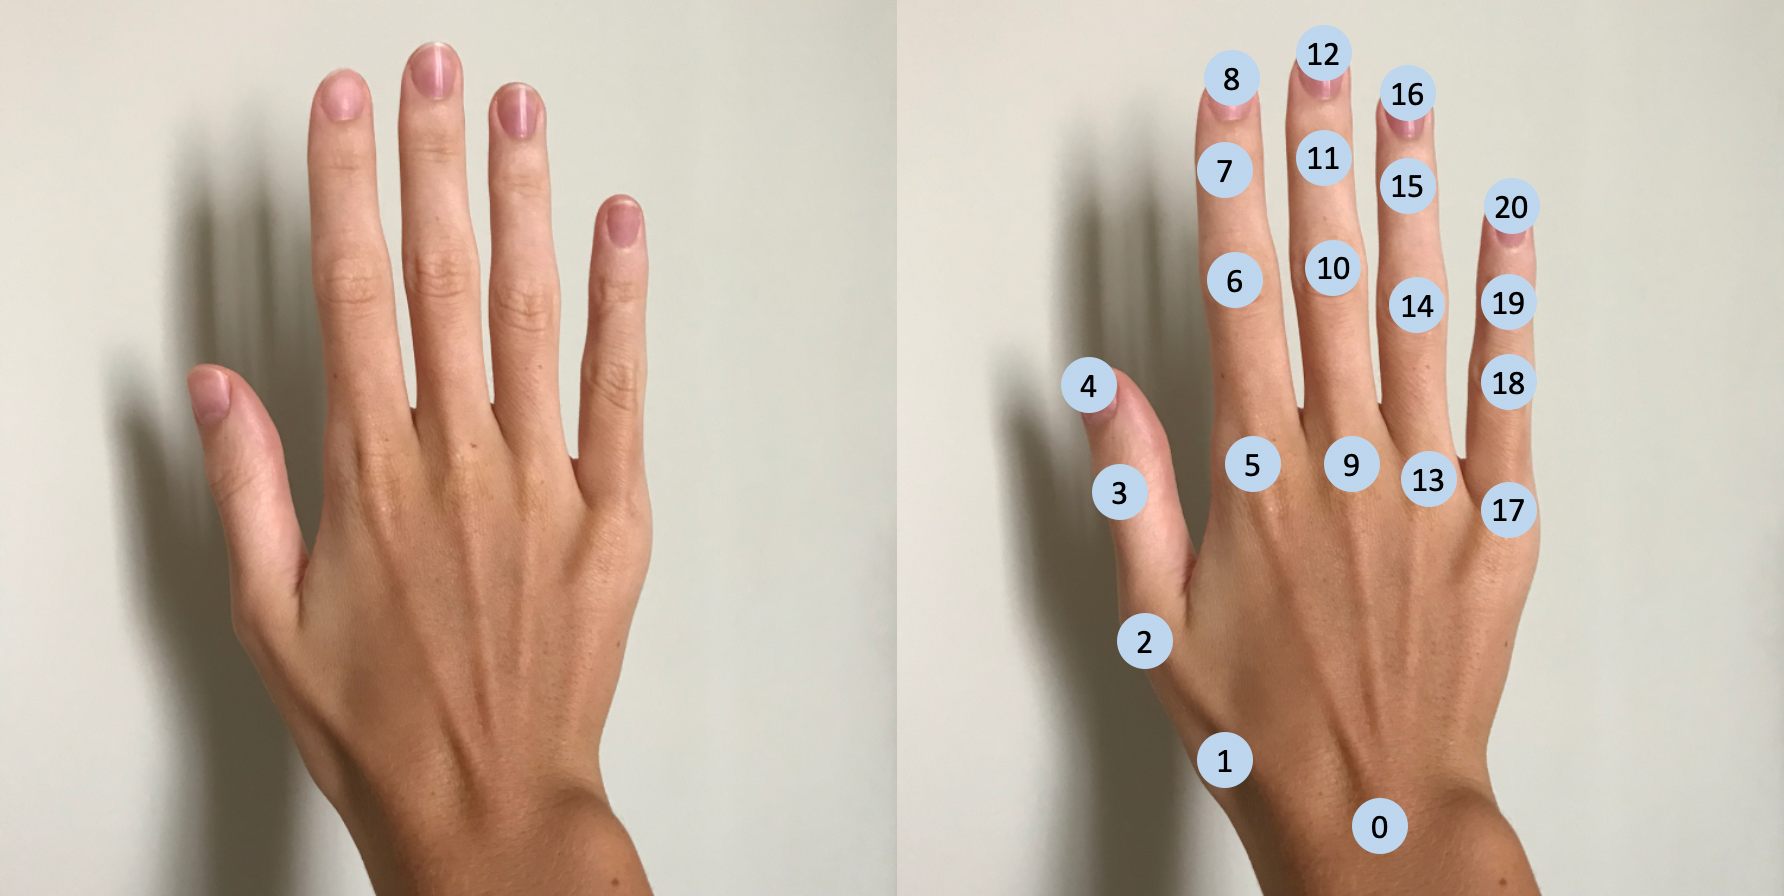 Gentle Introduction To 2d Hand Pose Estimation Approach Explained By Olga Chernytska Towards Data Science